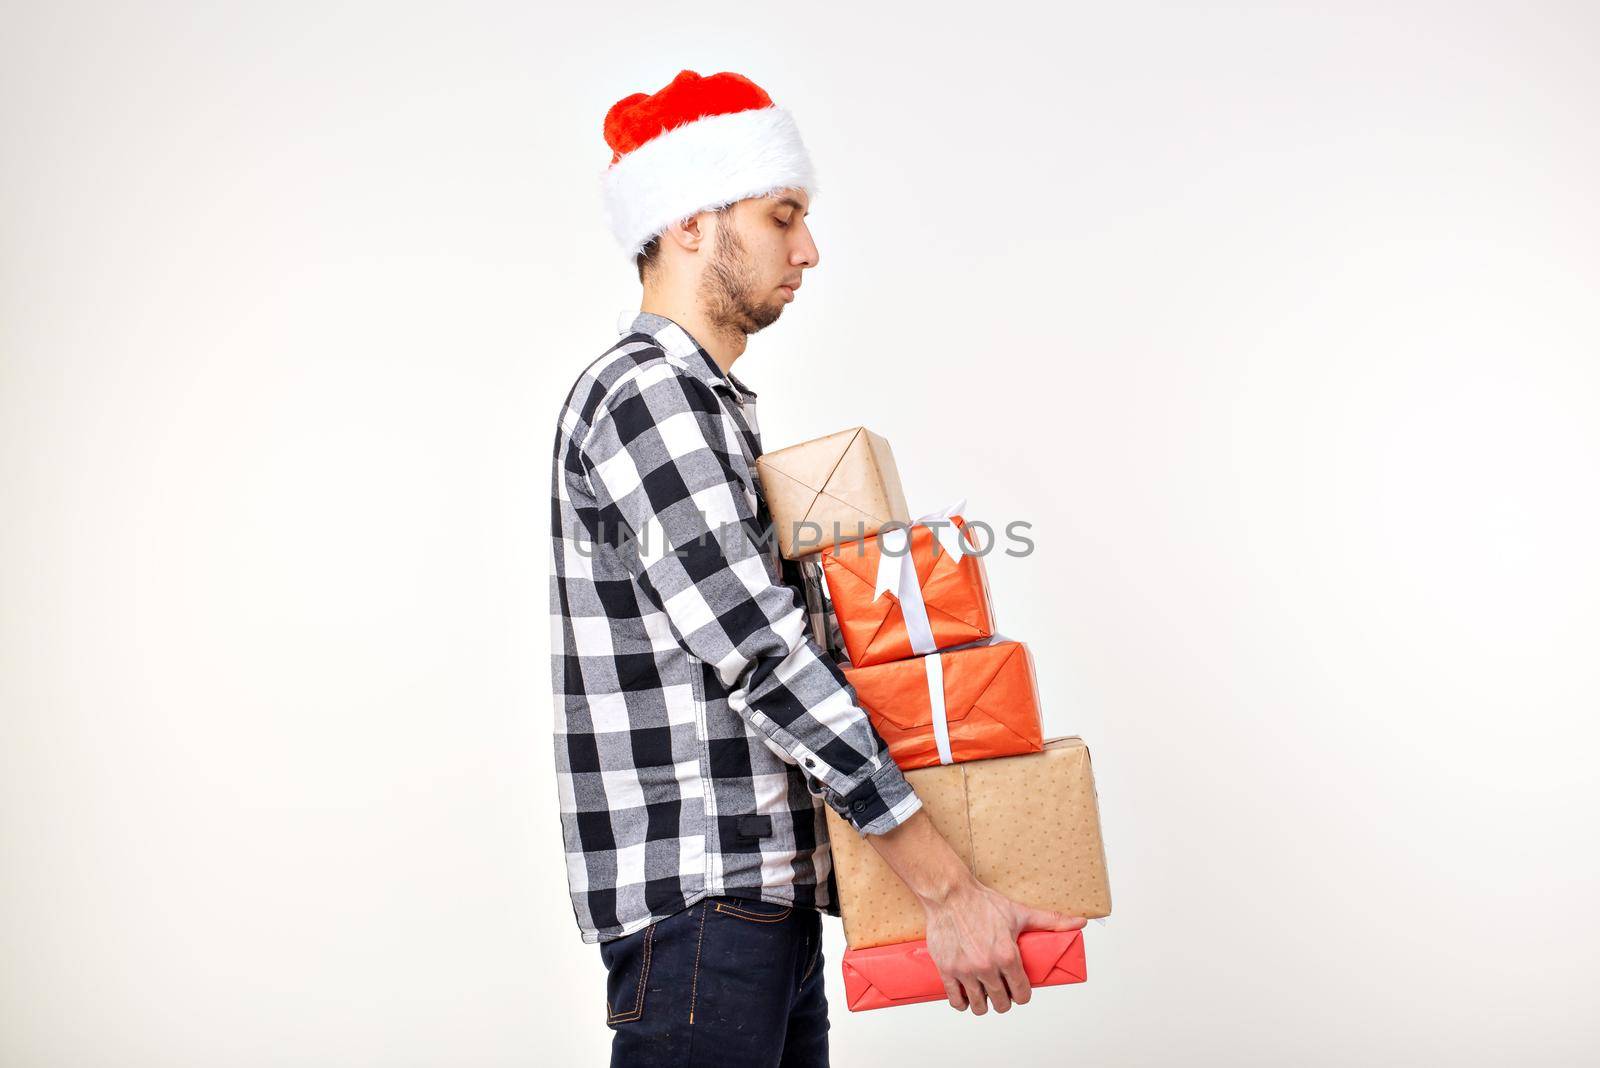 Holidays and presents concept - Funny man in Christmas Santa hat holding many gift boxes on white background by Satura86